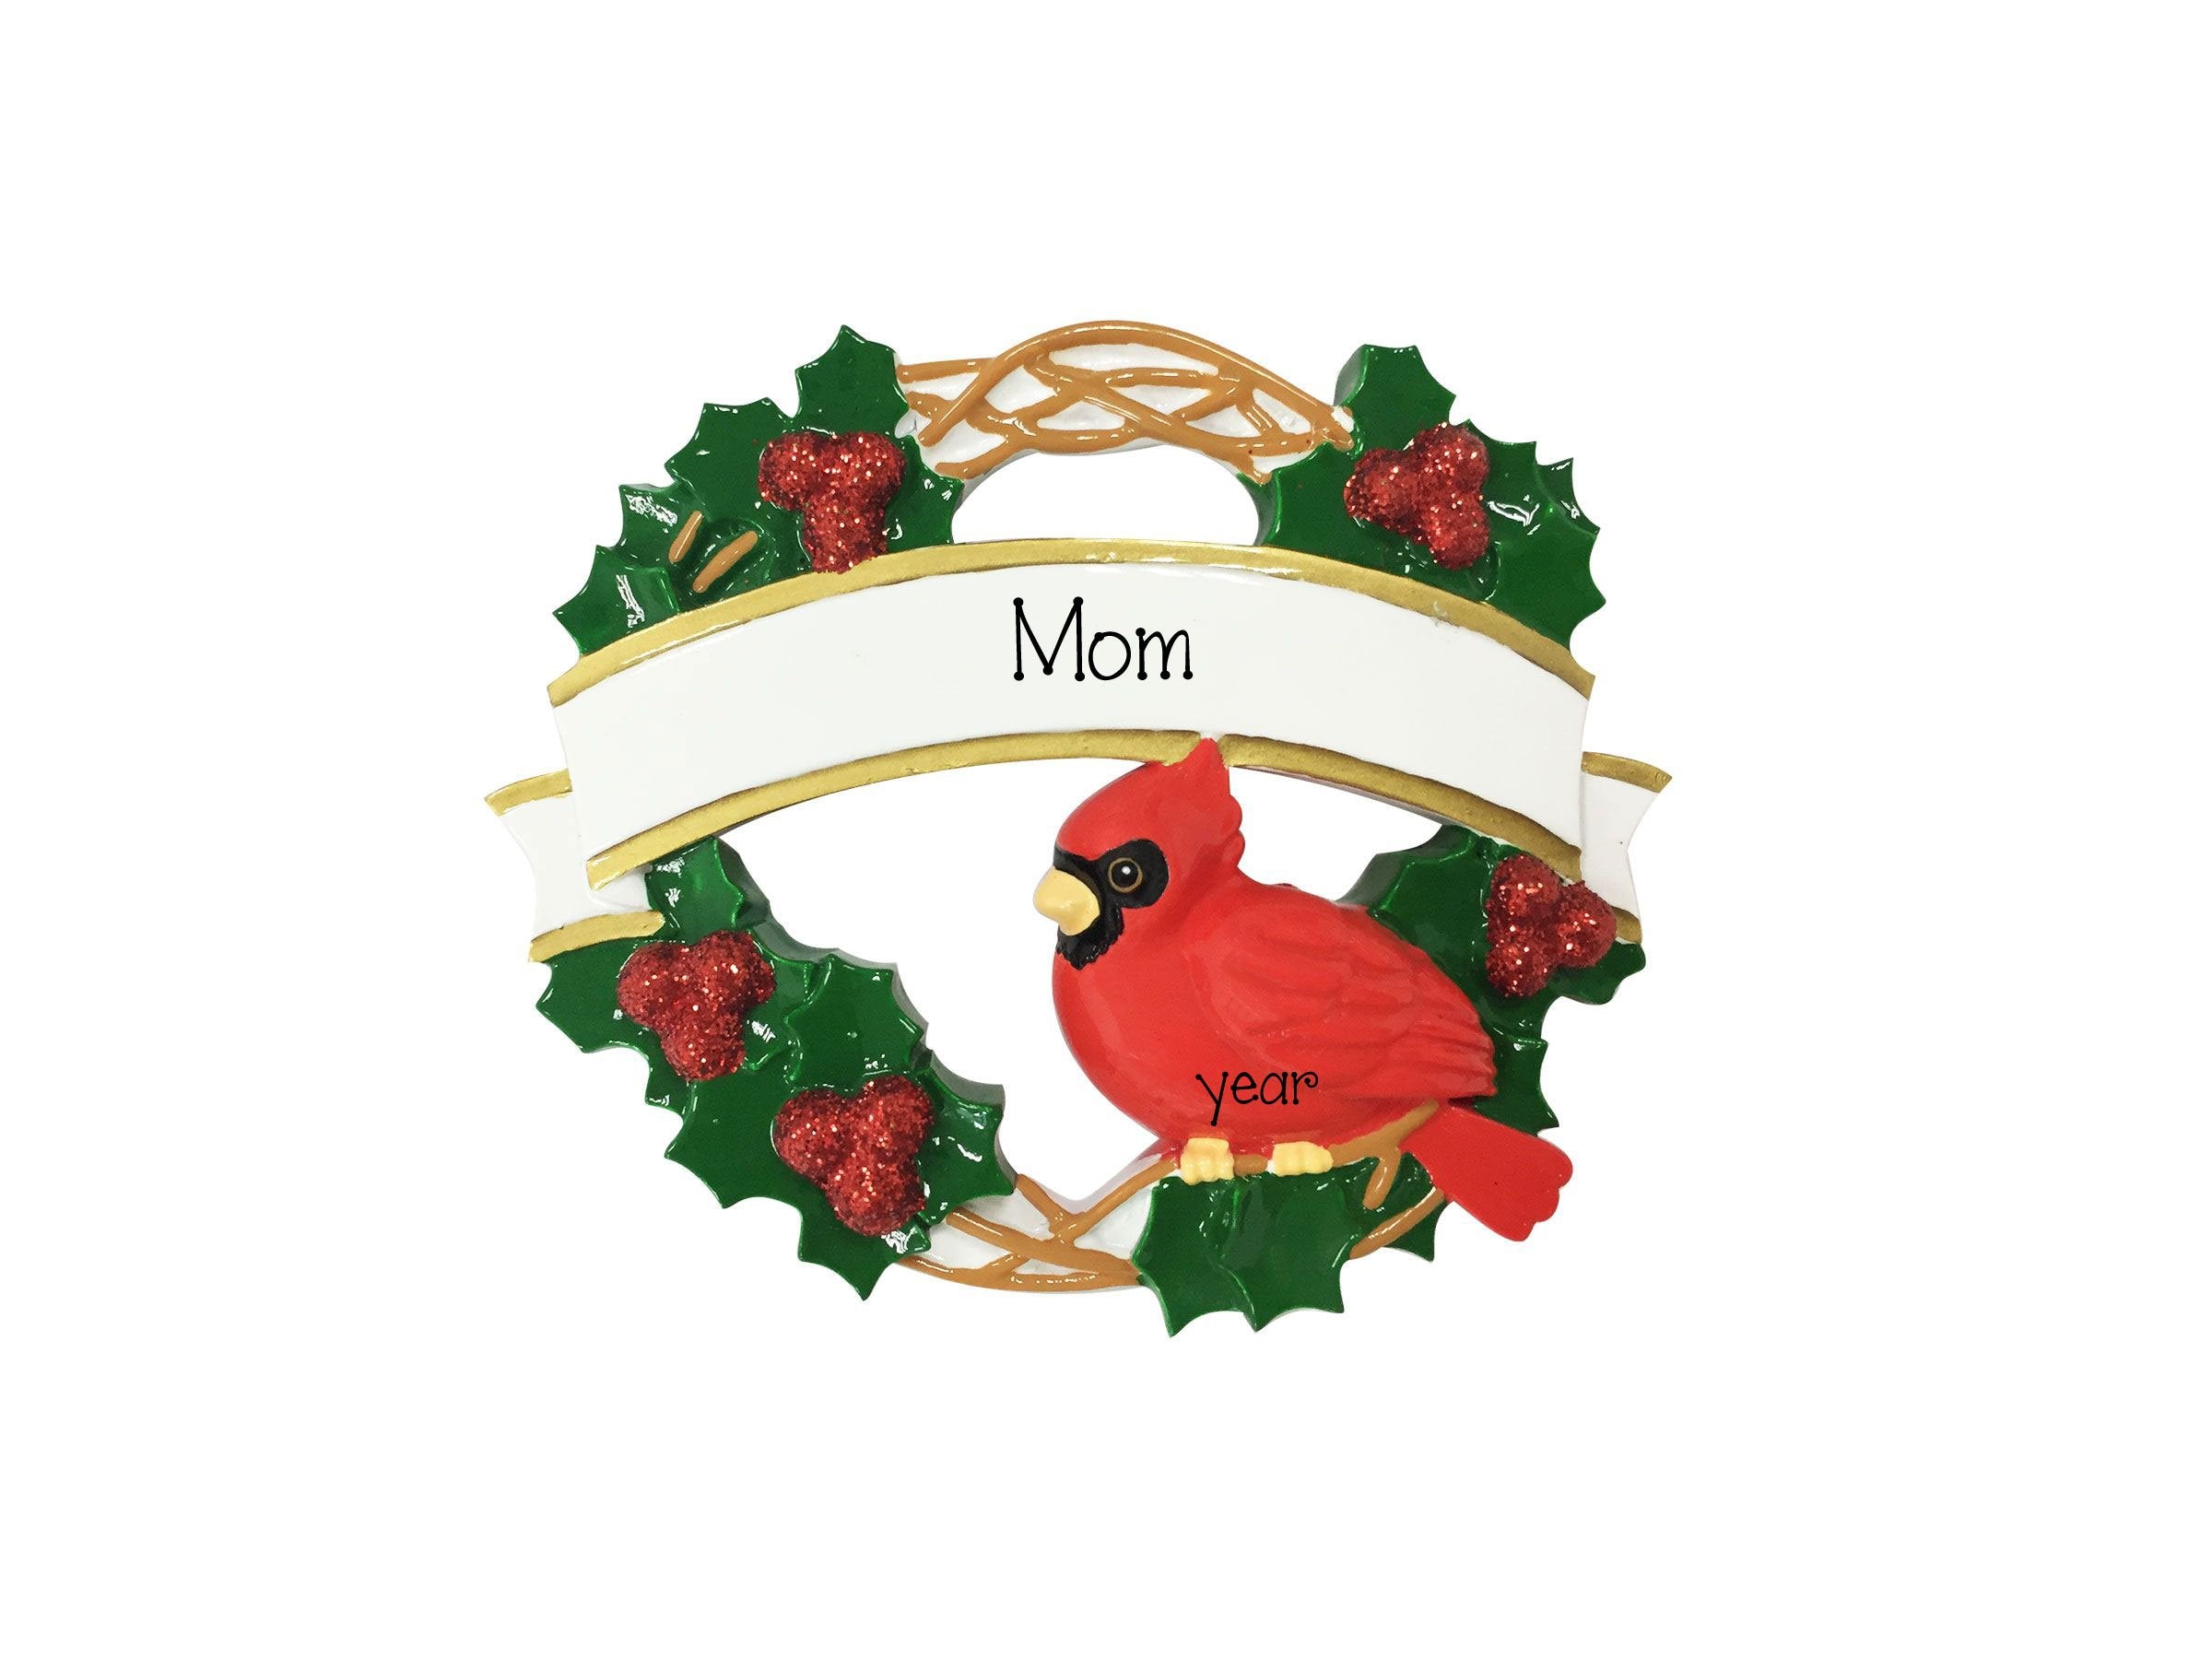 Cardinal bird on a Wreath~Personalized Christmas Ornament